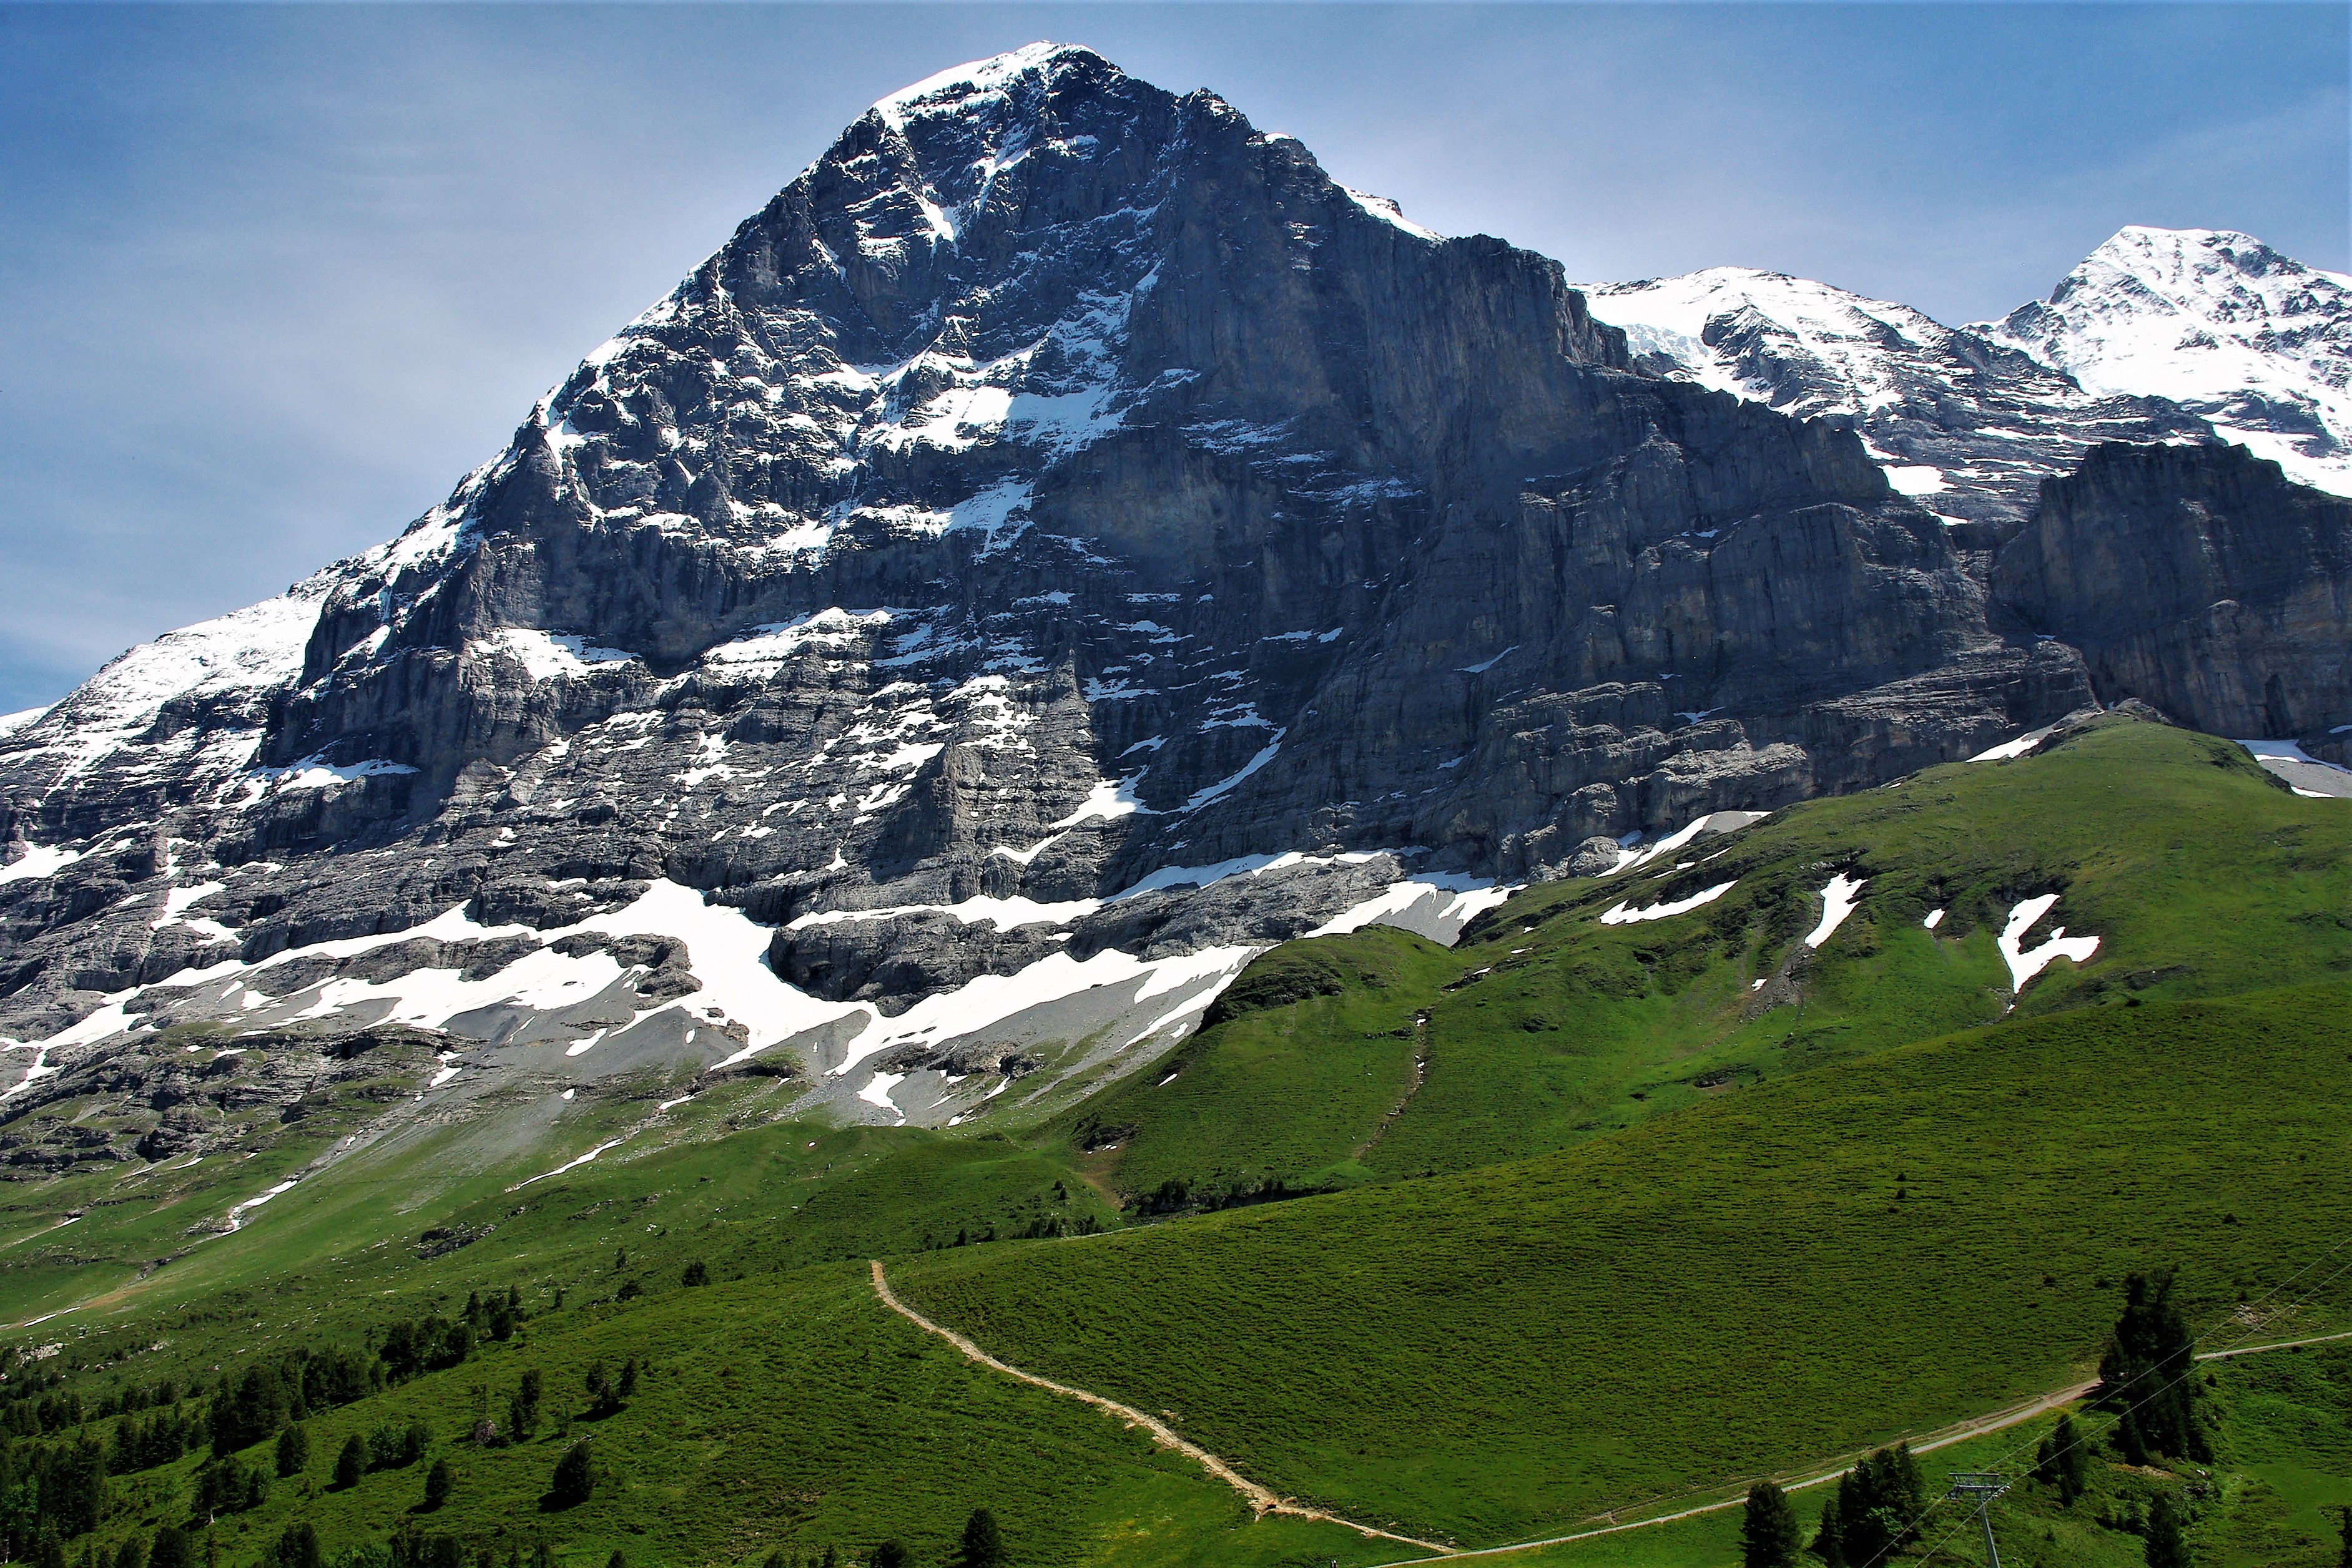 Perspectives on the North Face of the Eiger – a Mountaineering Classic of the Swiss Alps